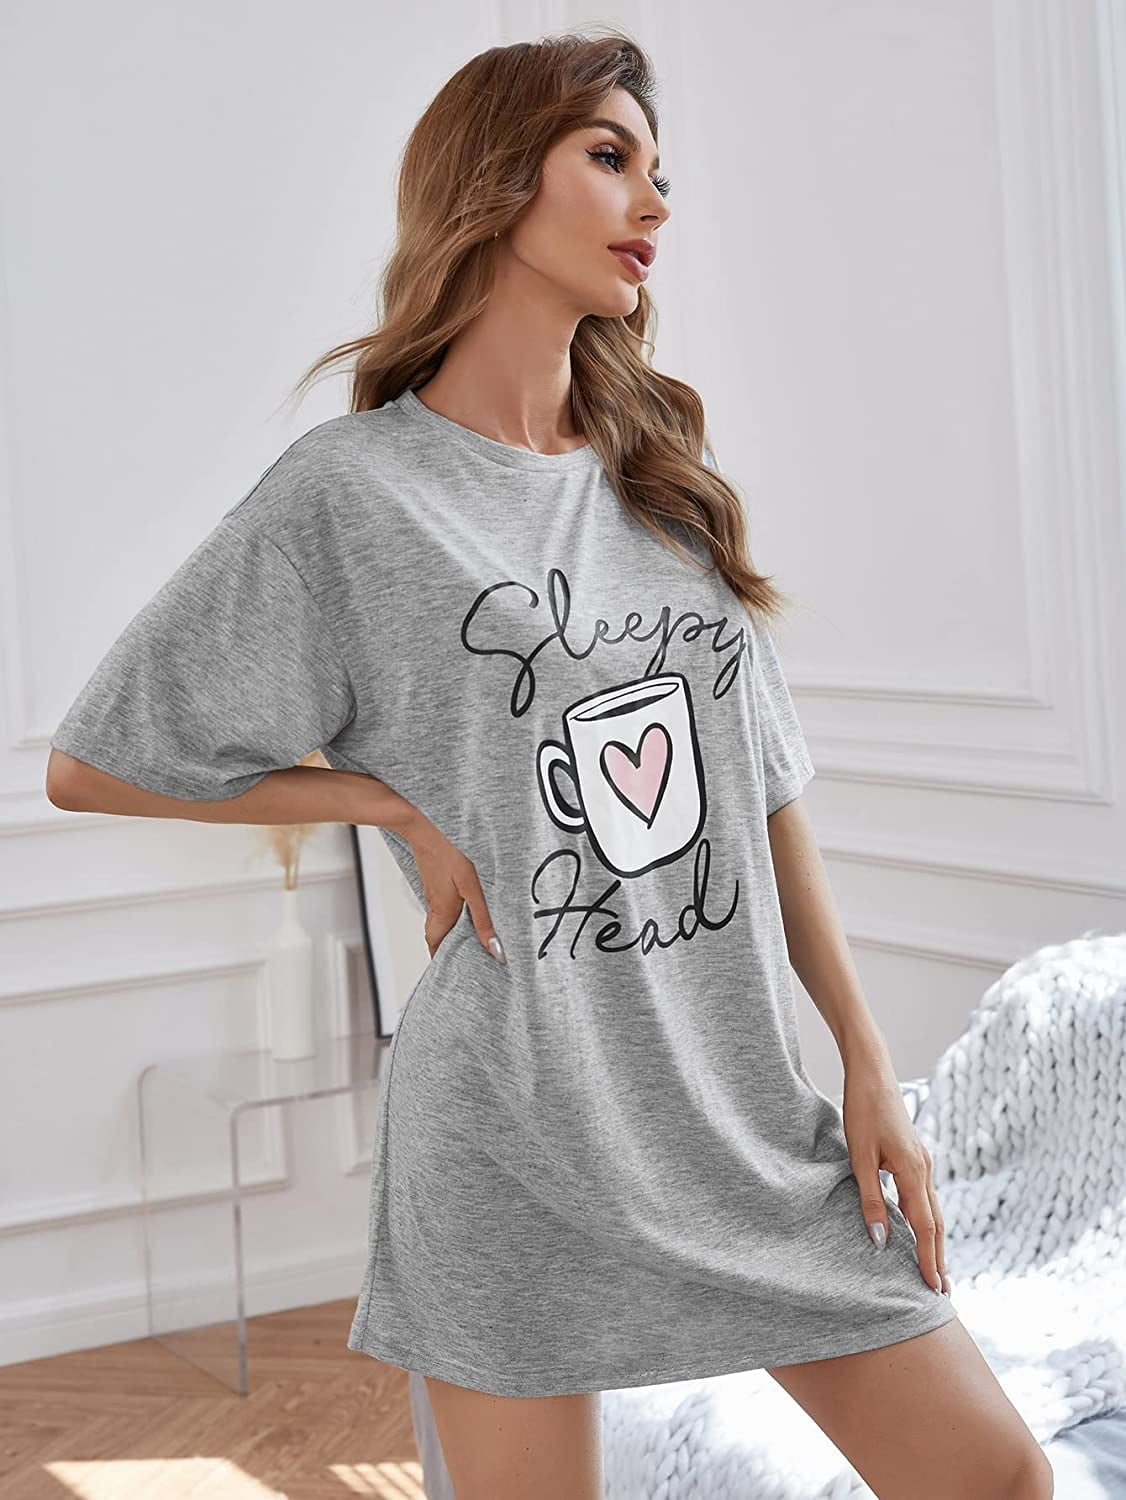 Floerns Women's Funny Lingerie Nightgown Cute Print Tshirt Sleepdress White  XS at  Women's Clothing store